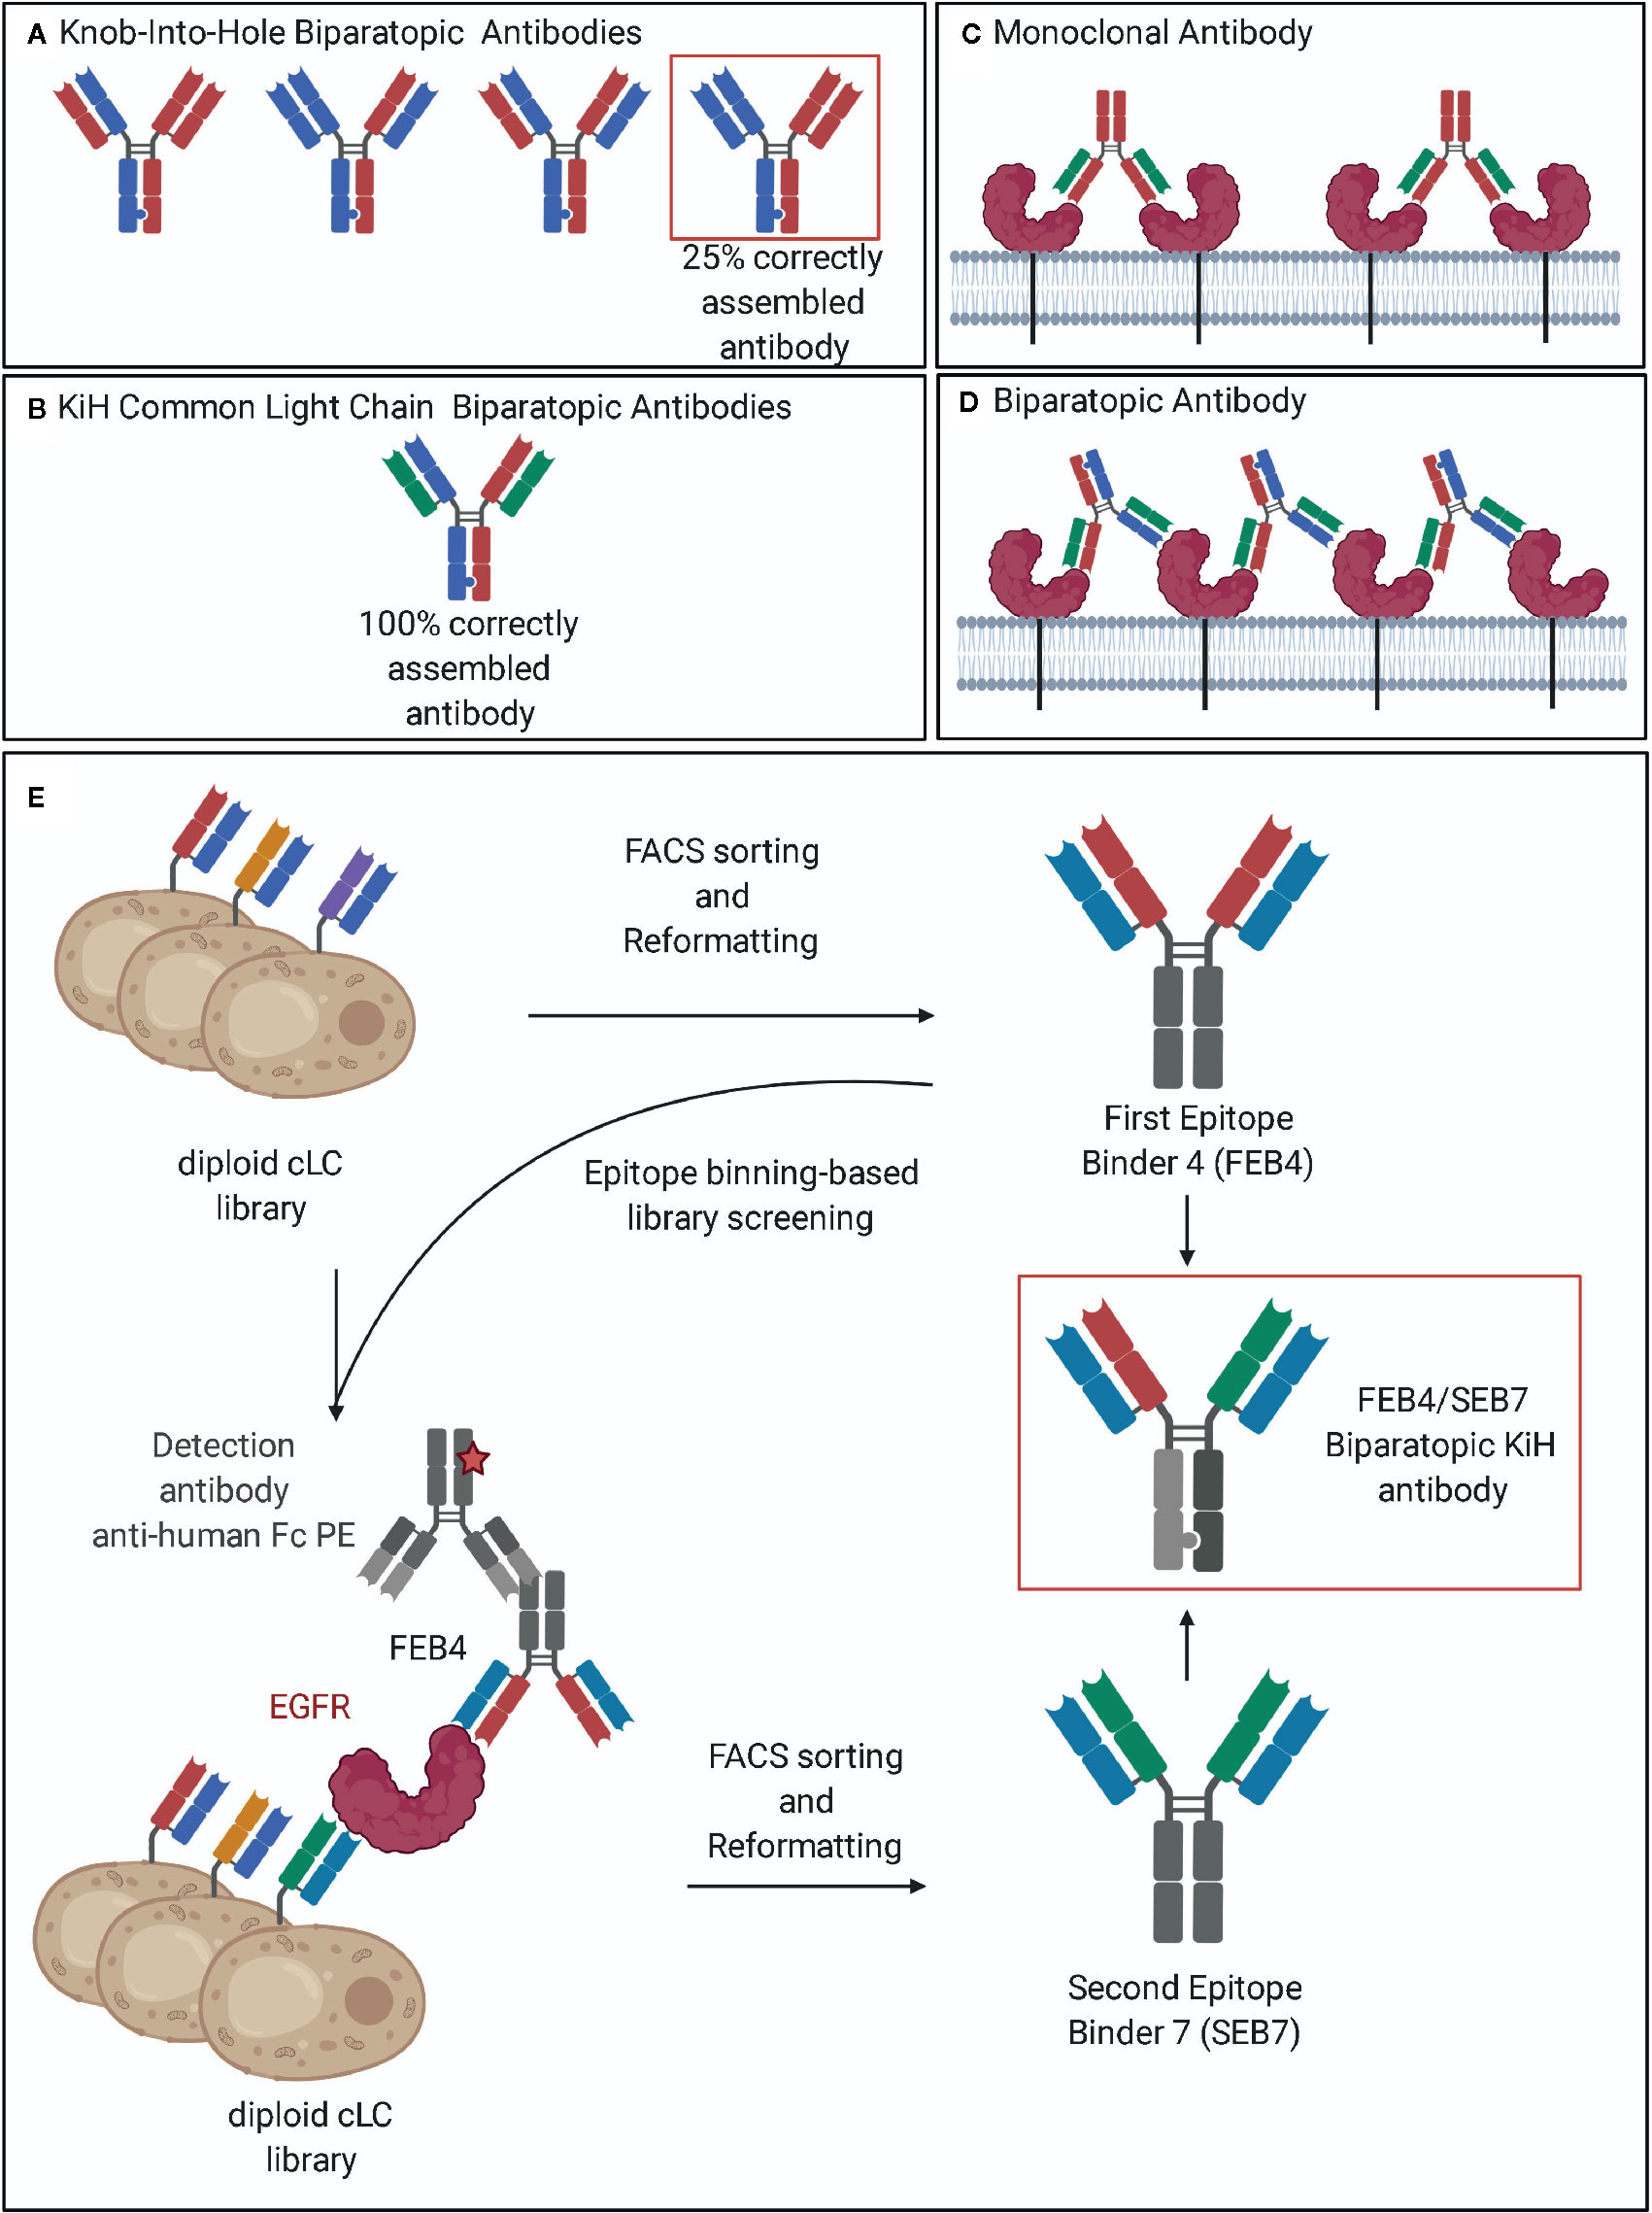 Barry Lure ventilation Frontiers | Expeditious Generation of Biparatopic Common Light Chain  Antibodies via Chicken Immunization and Yeast Display Screening | Immunology